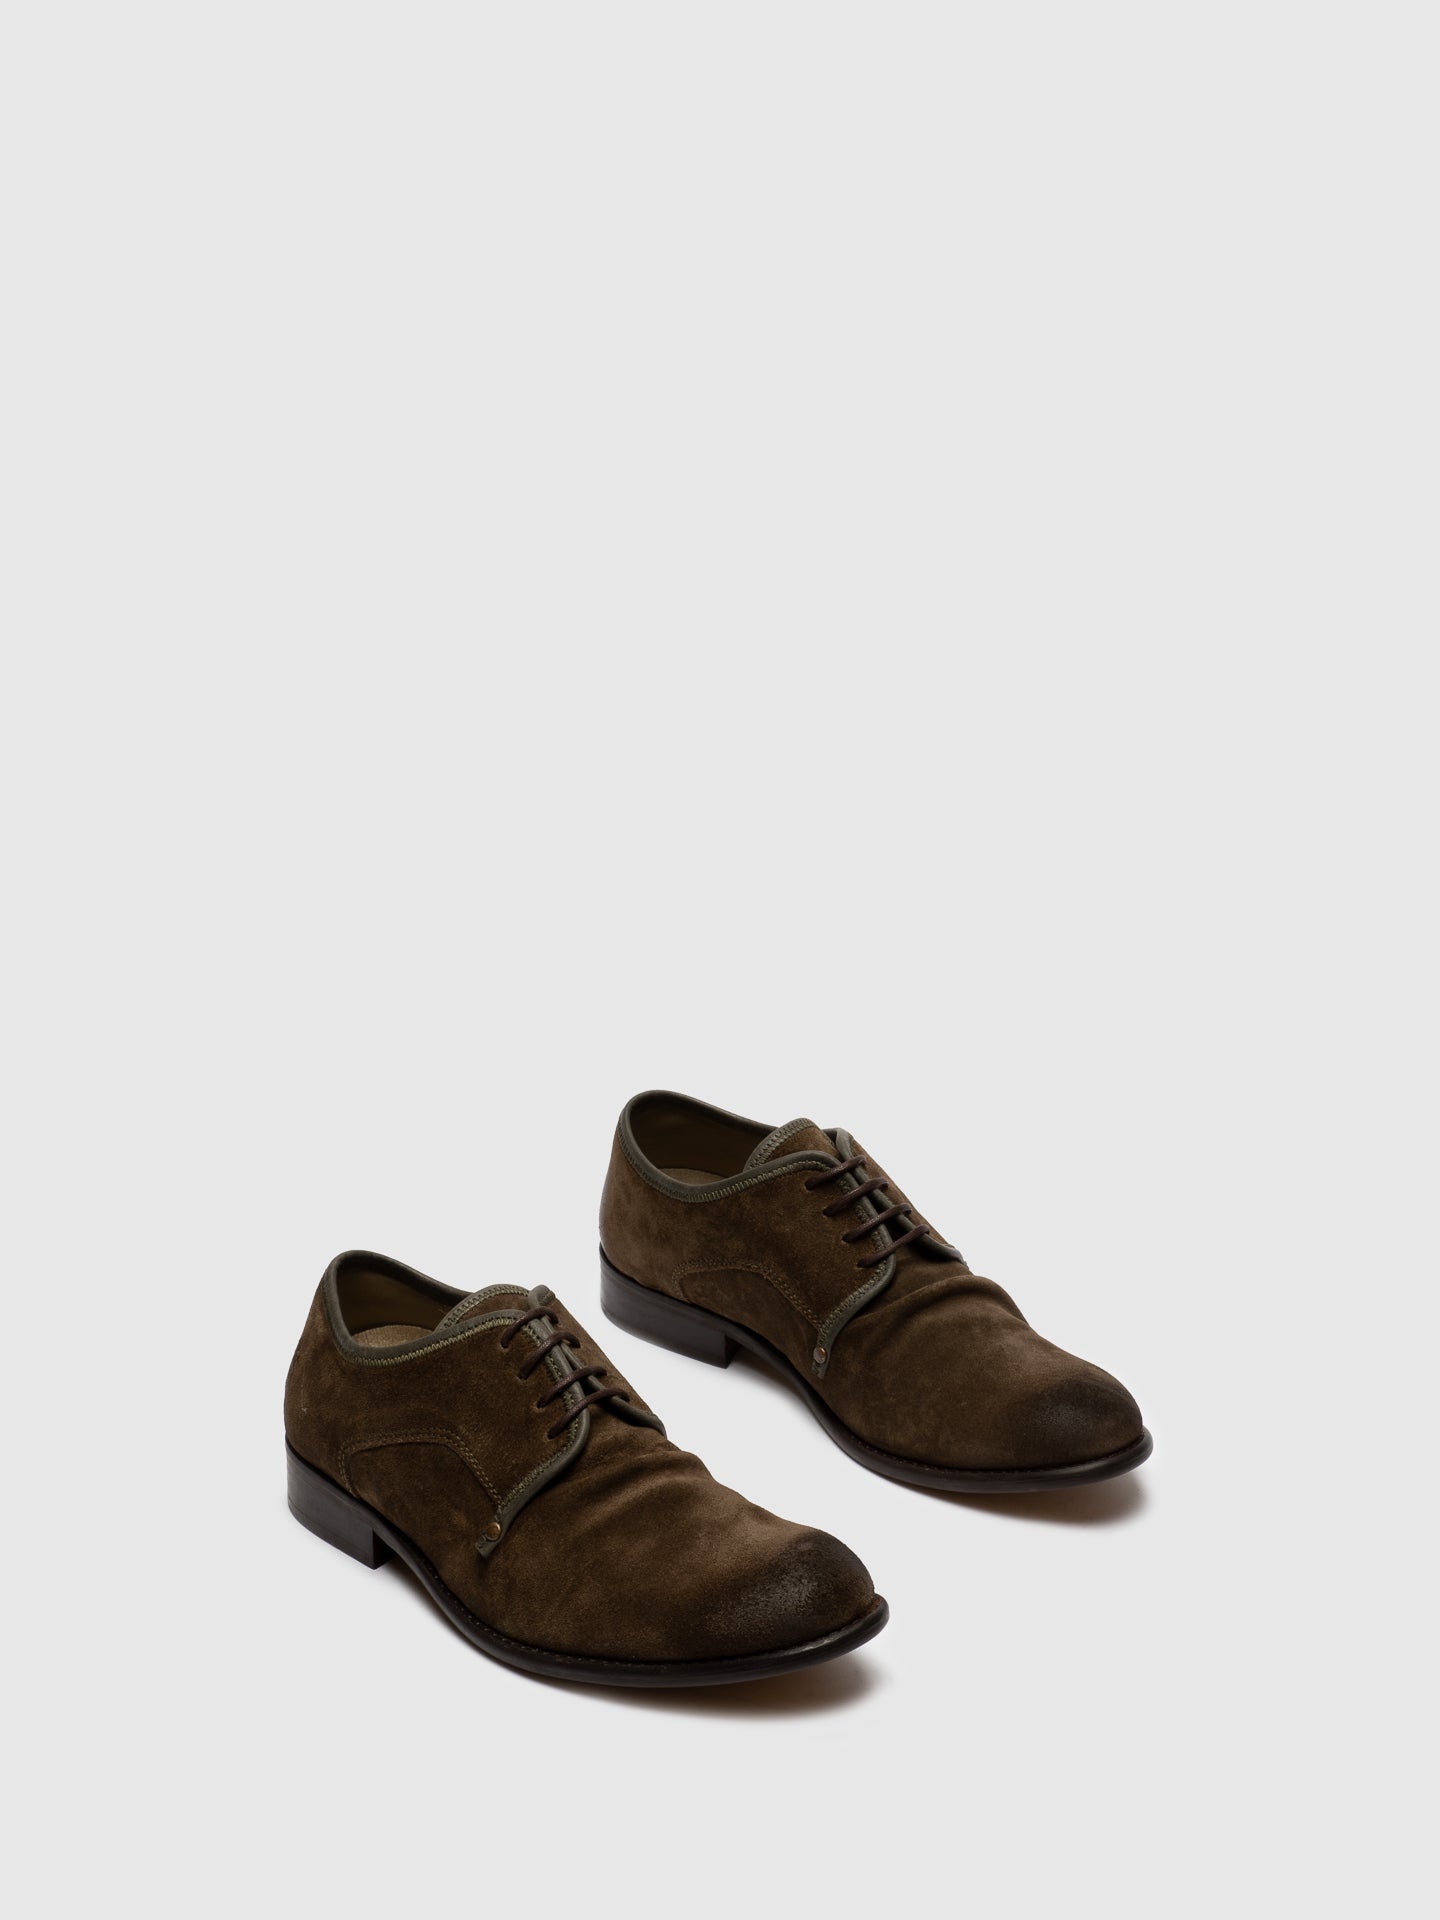 Fly London Olive Lace-up Shoes